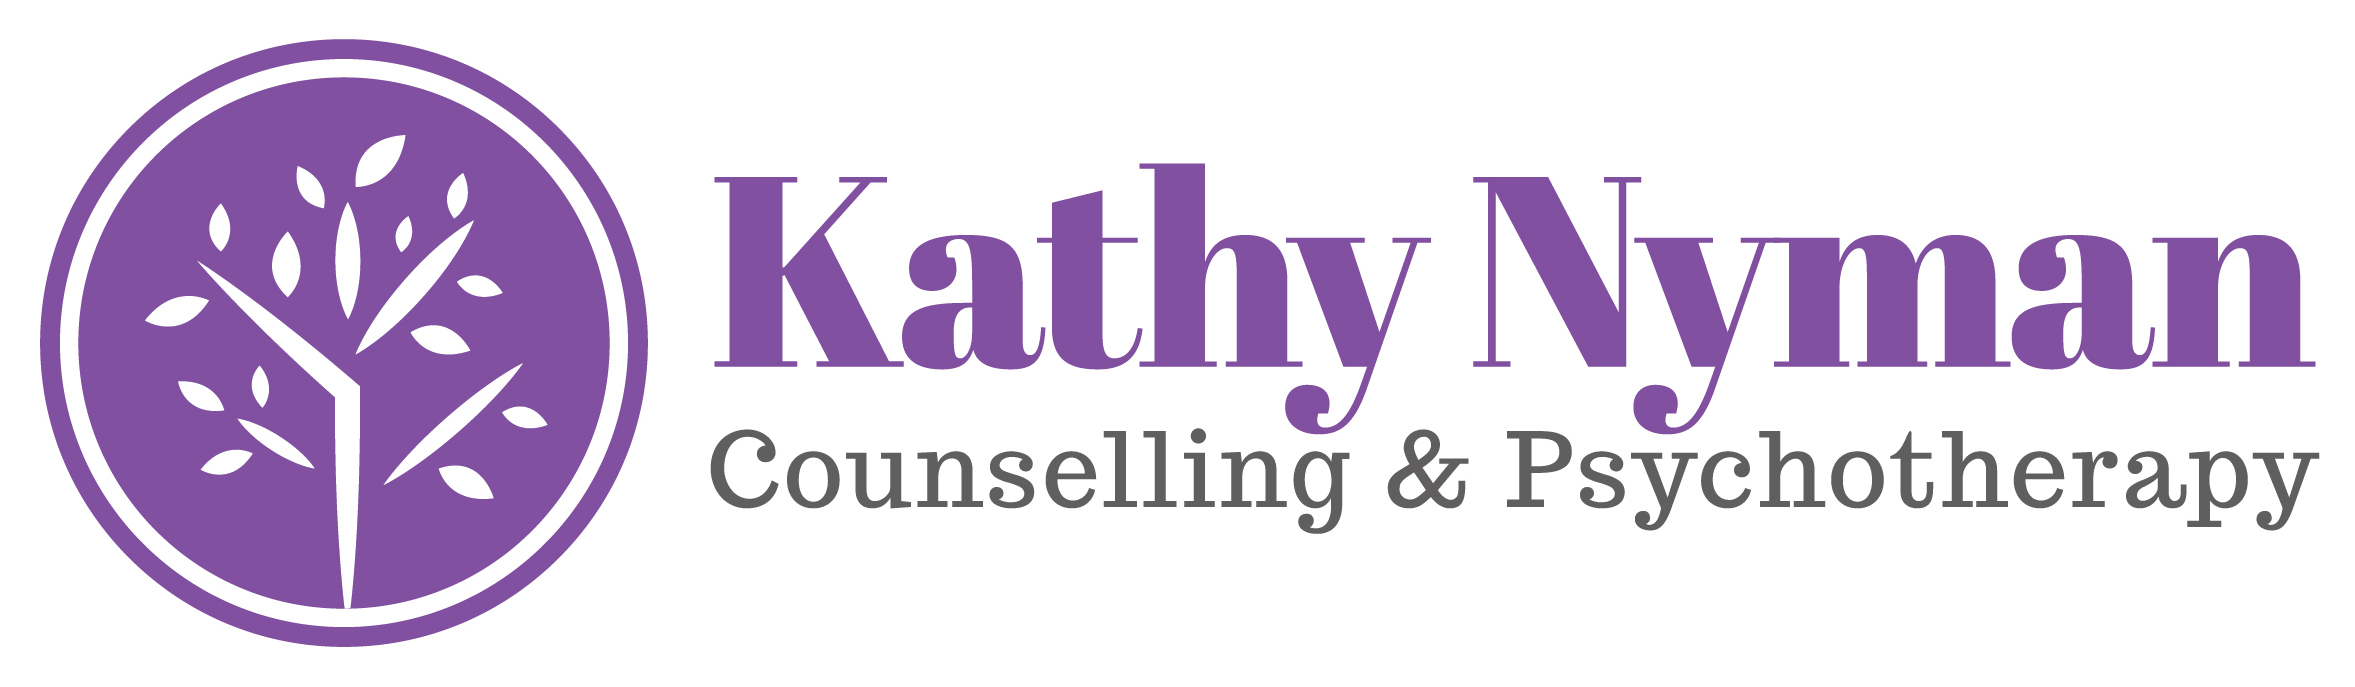 Kathy Nyman Counselling & Psychotherapy